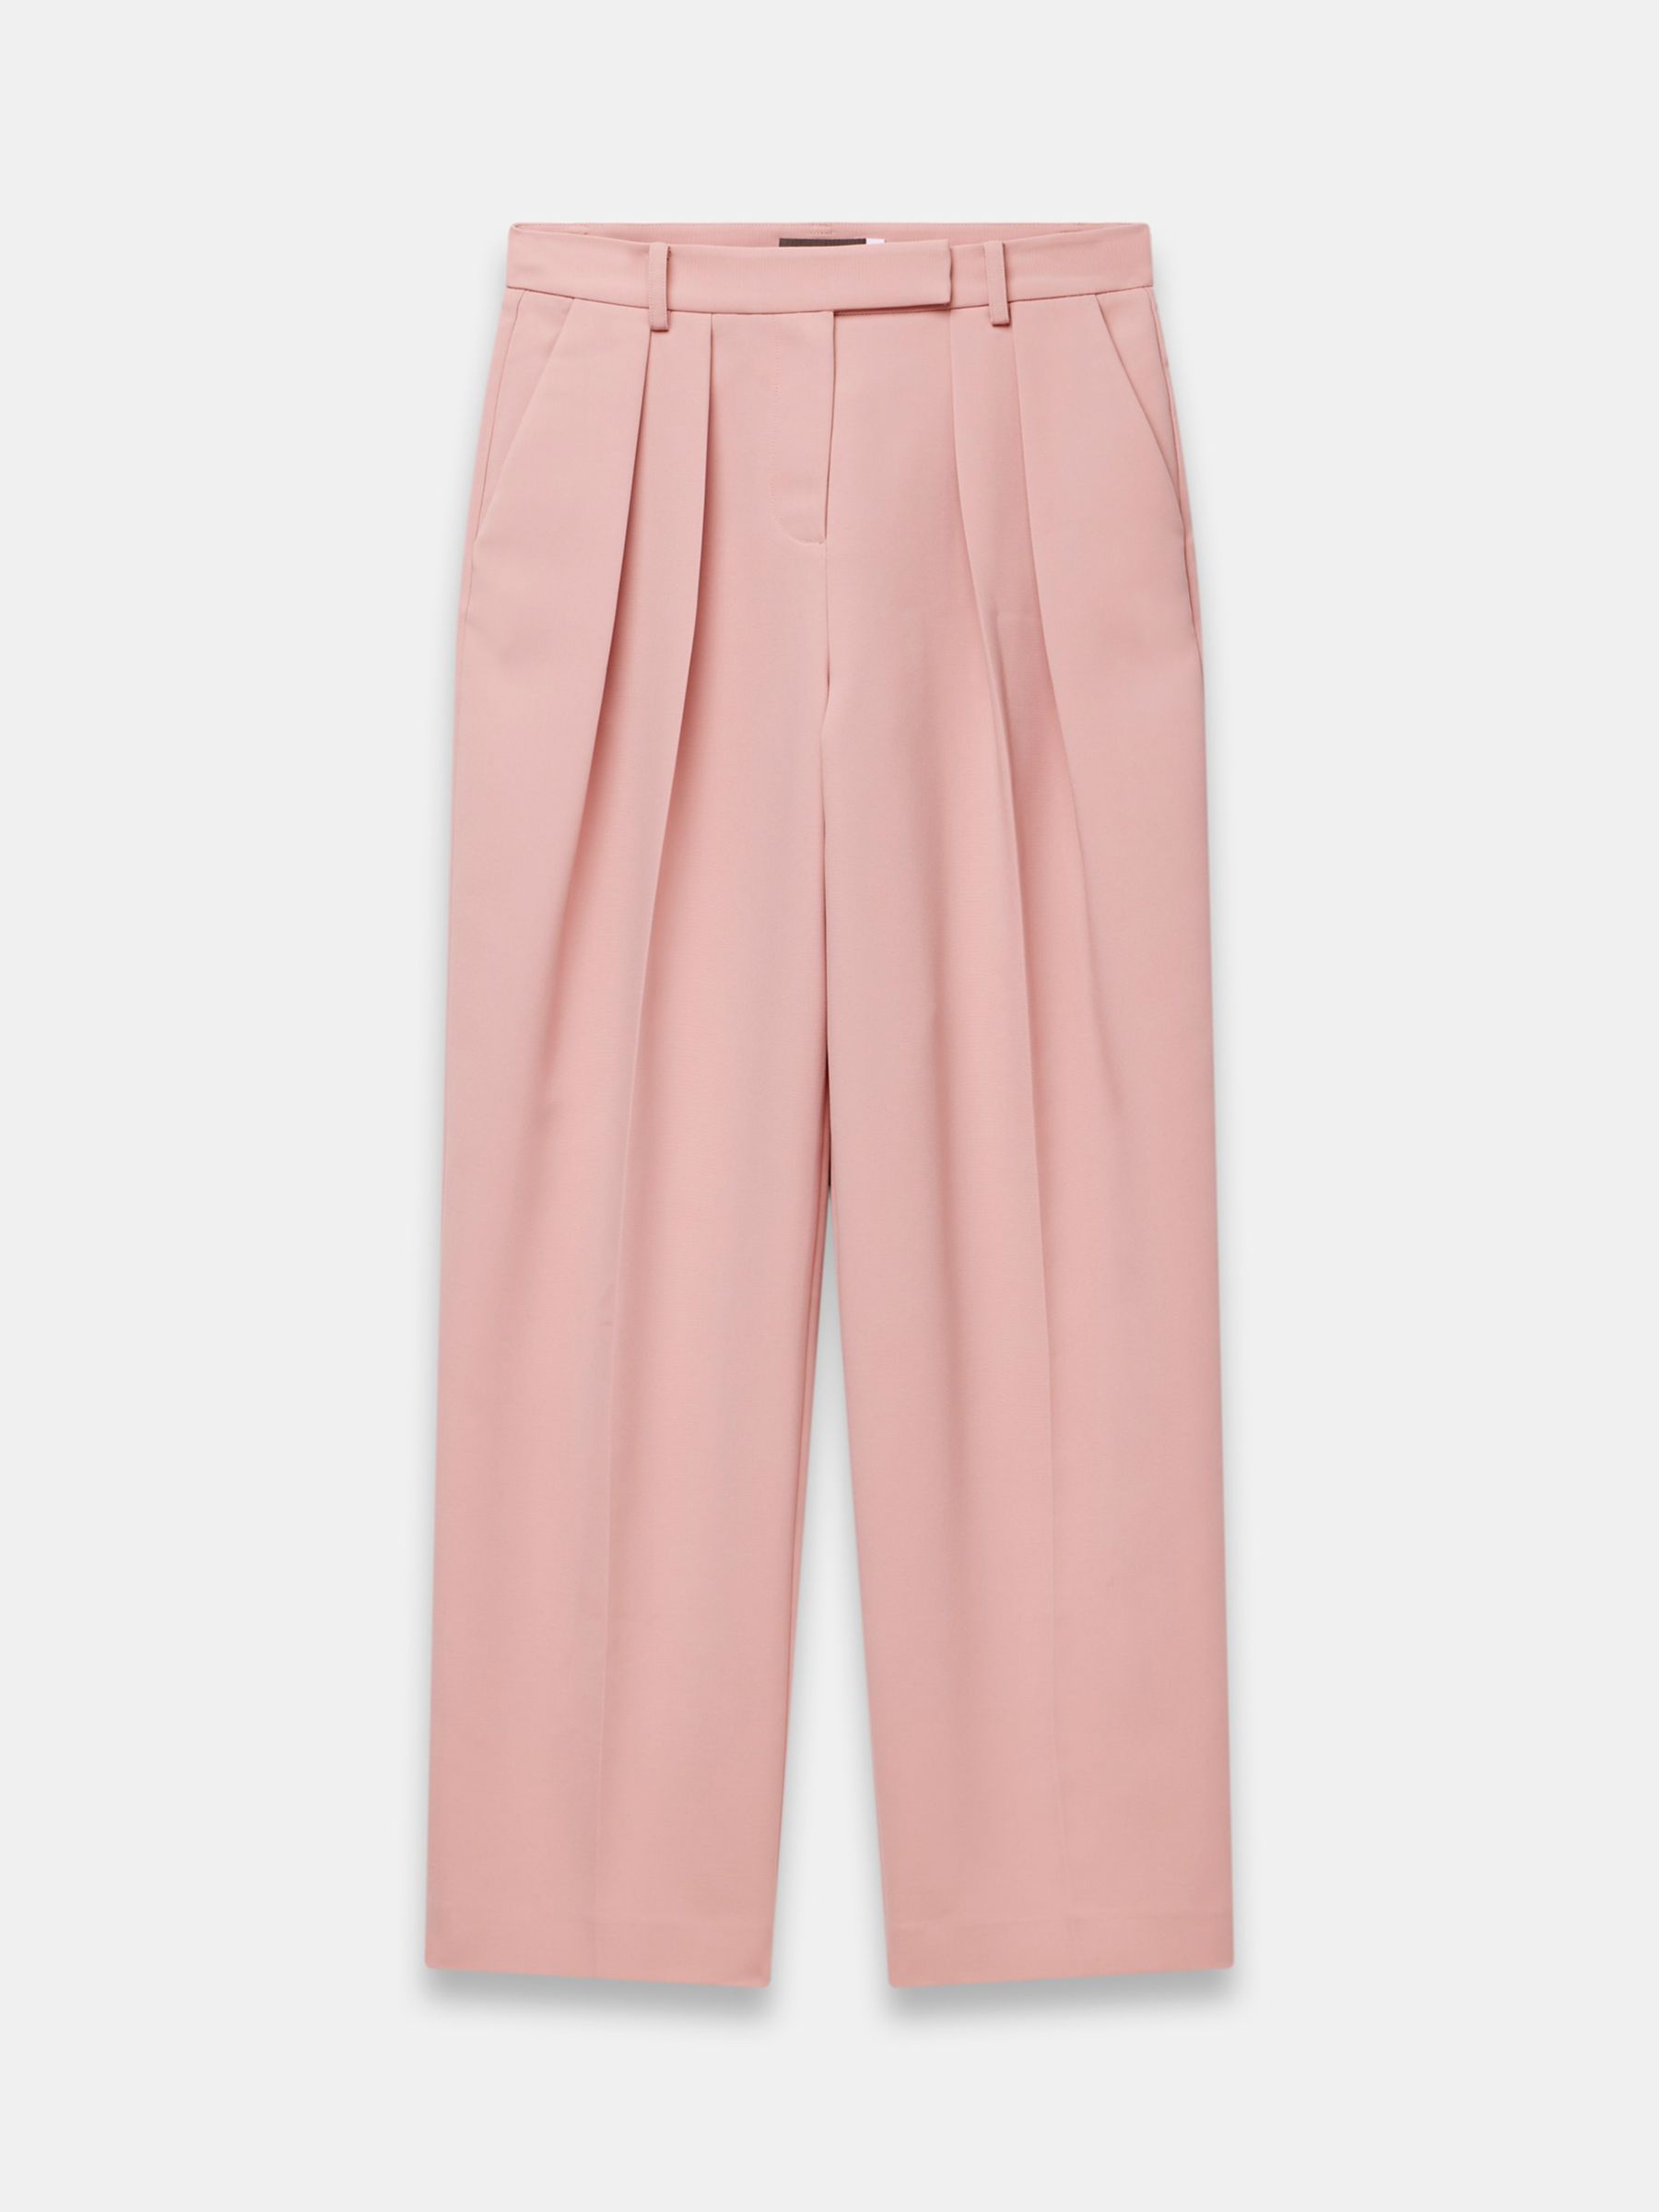 Buy Mint Velvet Tailored Wide Leg Pleat Front Trousers, Pink Online at johnlewis.com